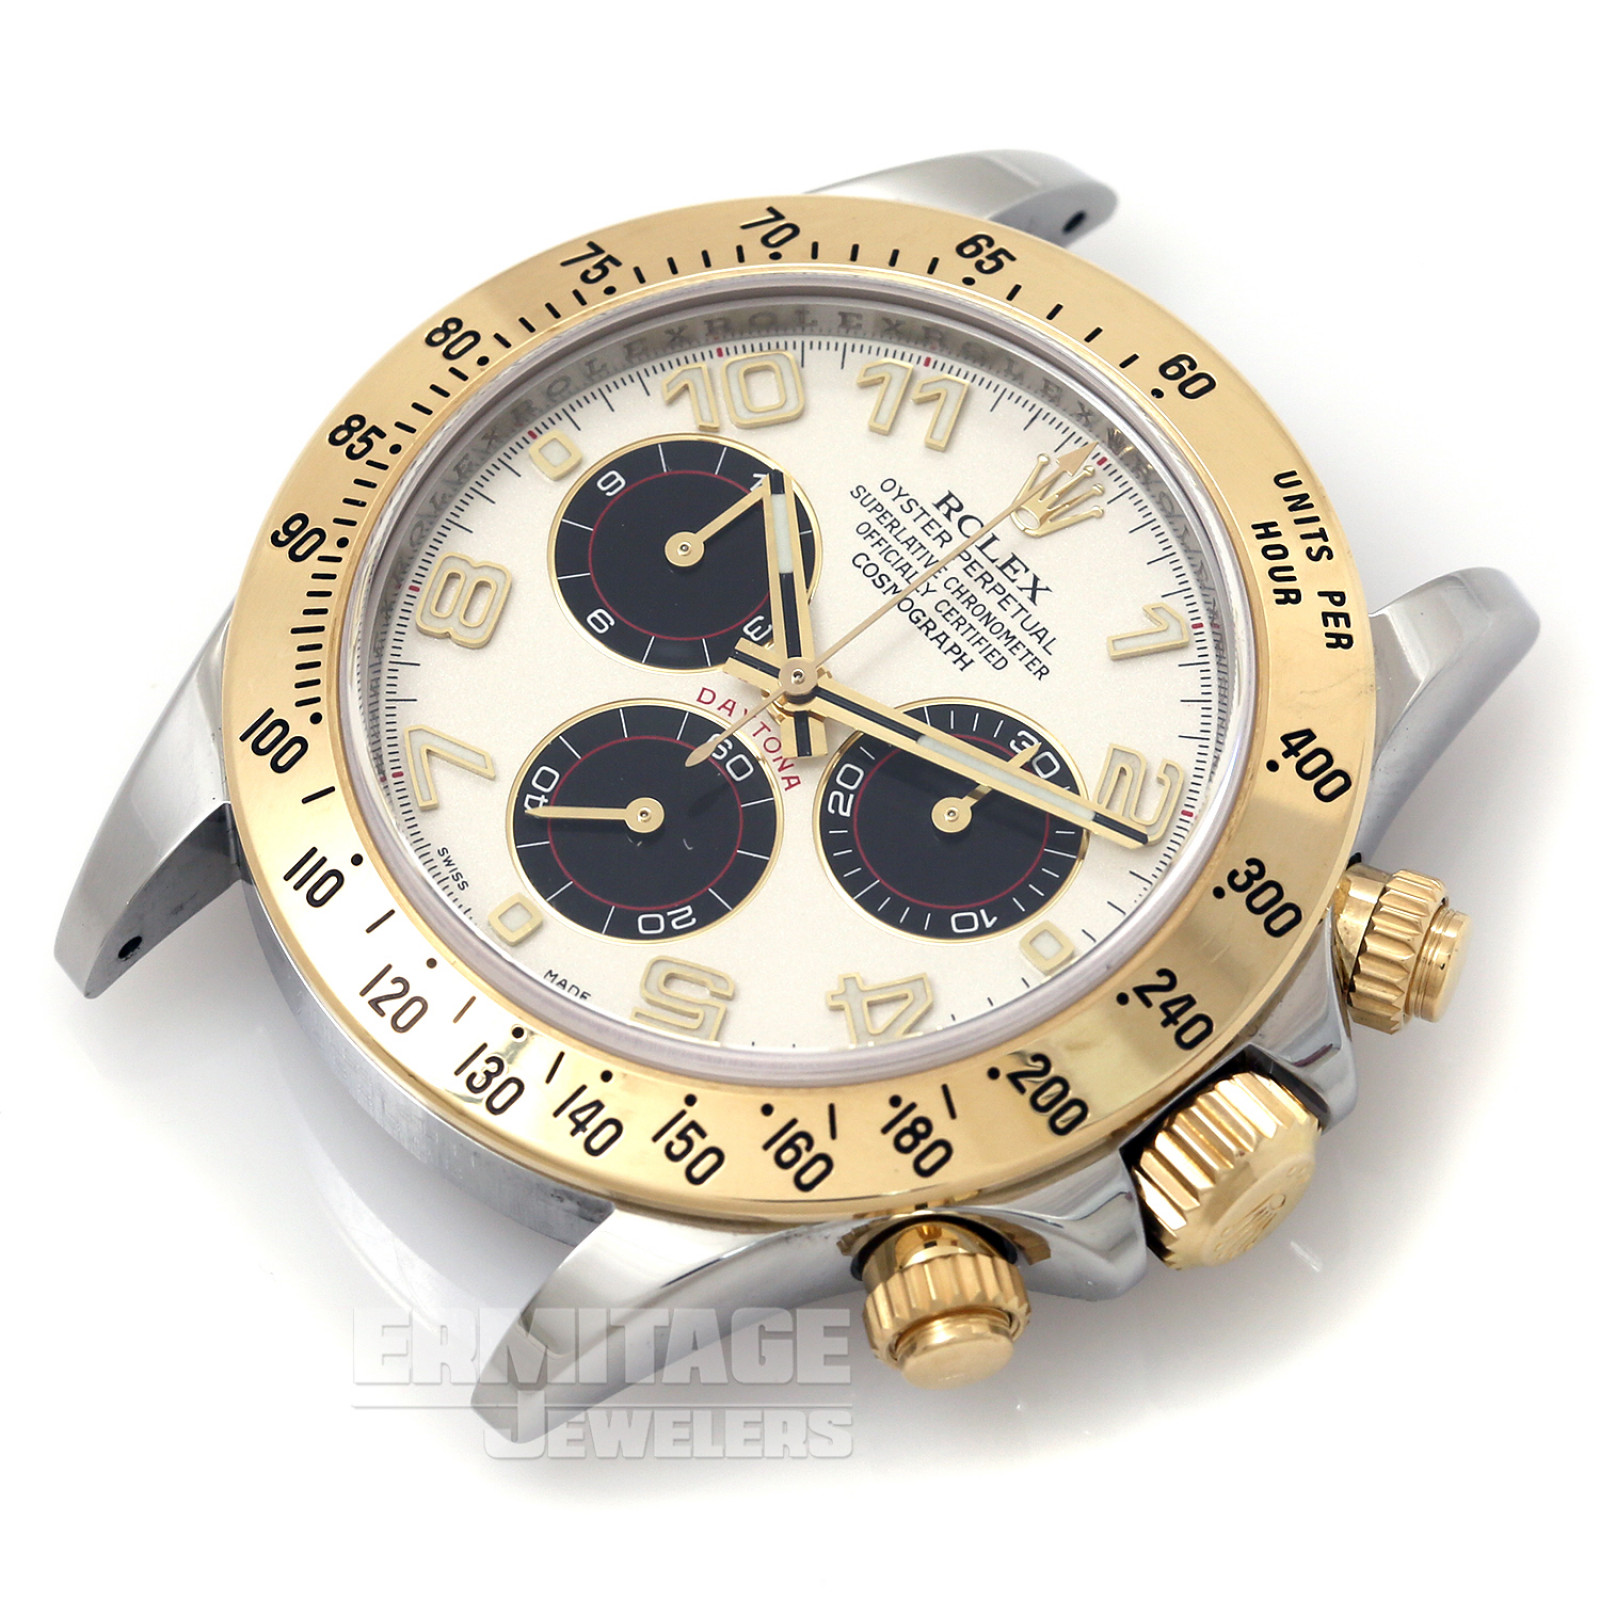 40 mm Rolex Daytona 116523 Gold & Steel on Oyster with White Panda Dial